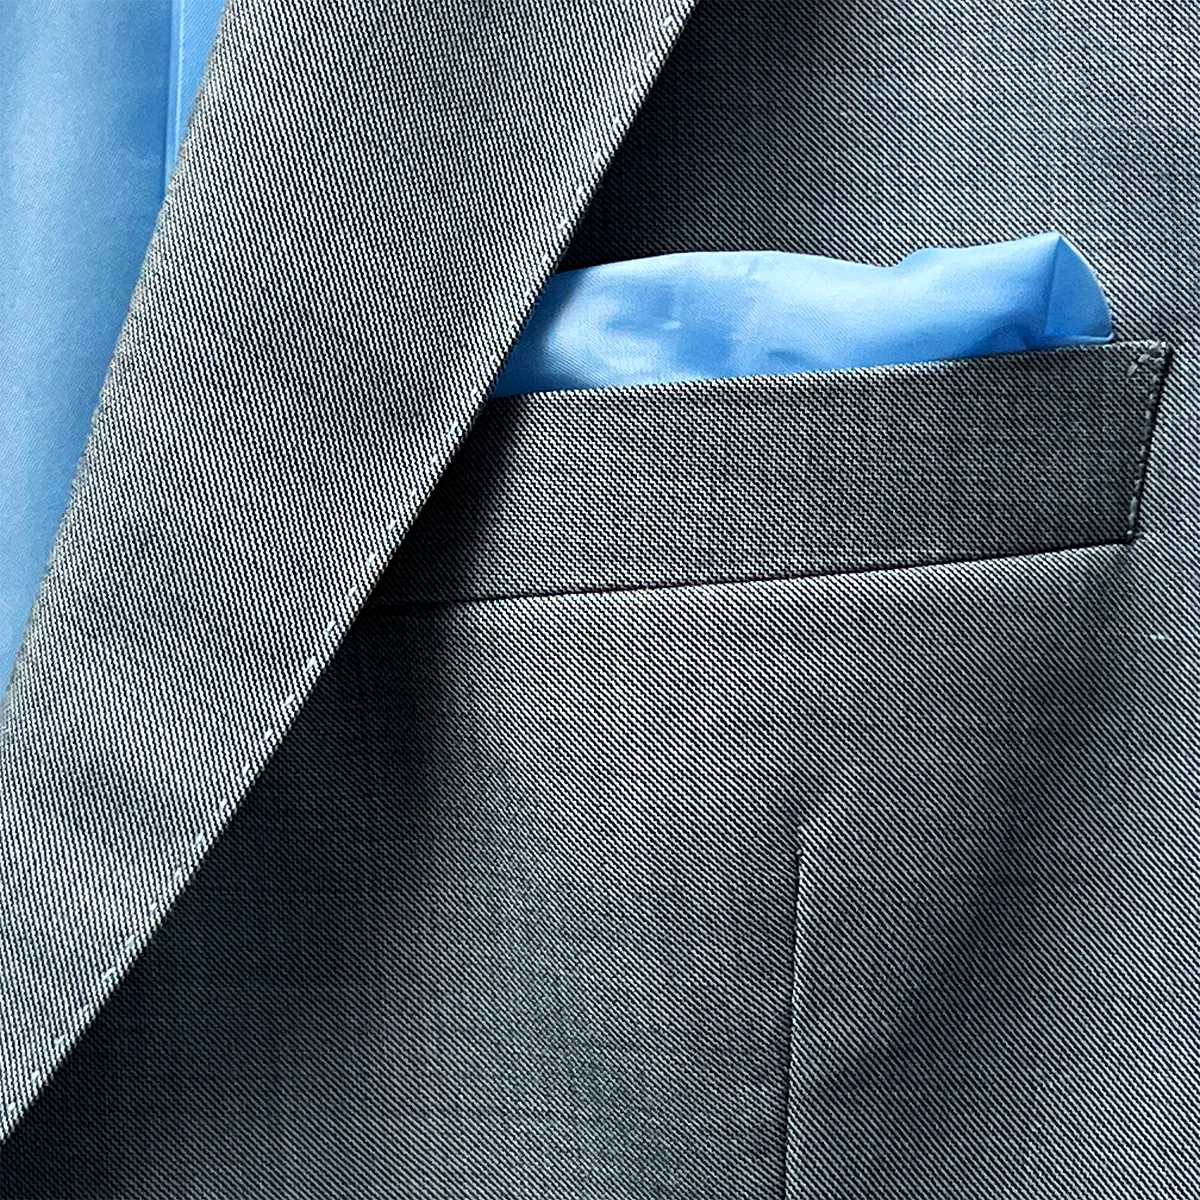 Built-in pocket square on the light grey suit, neatly tucked into the straight flap pocket.